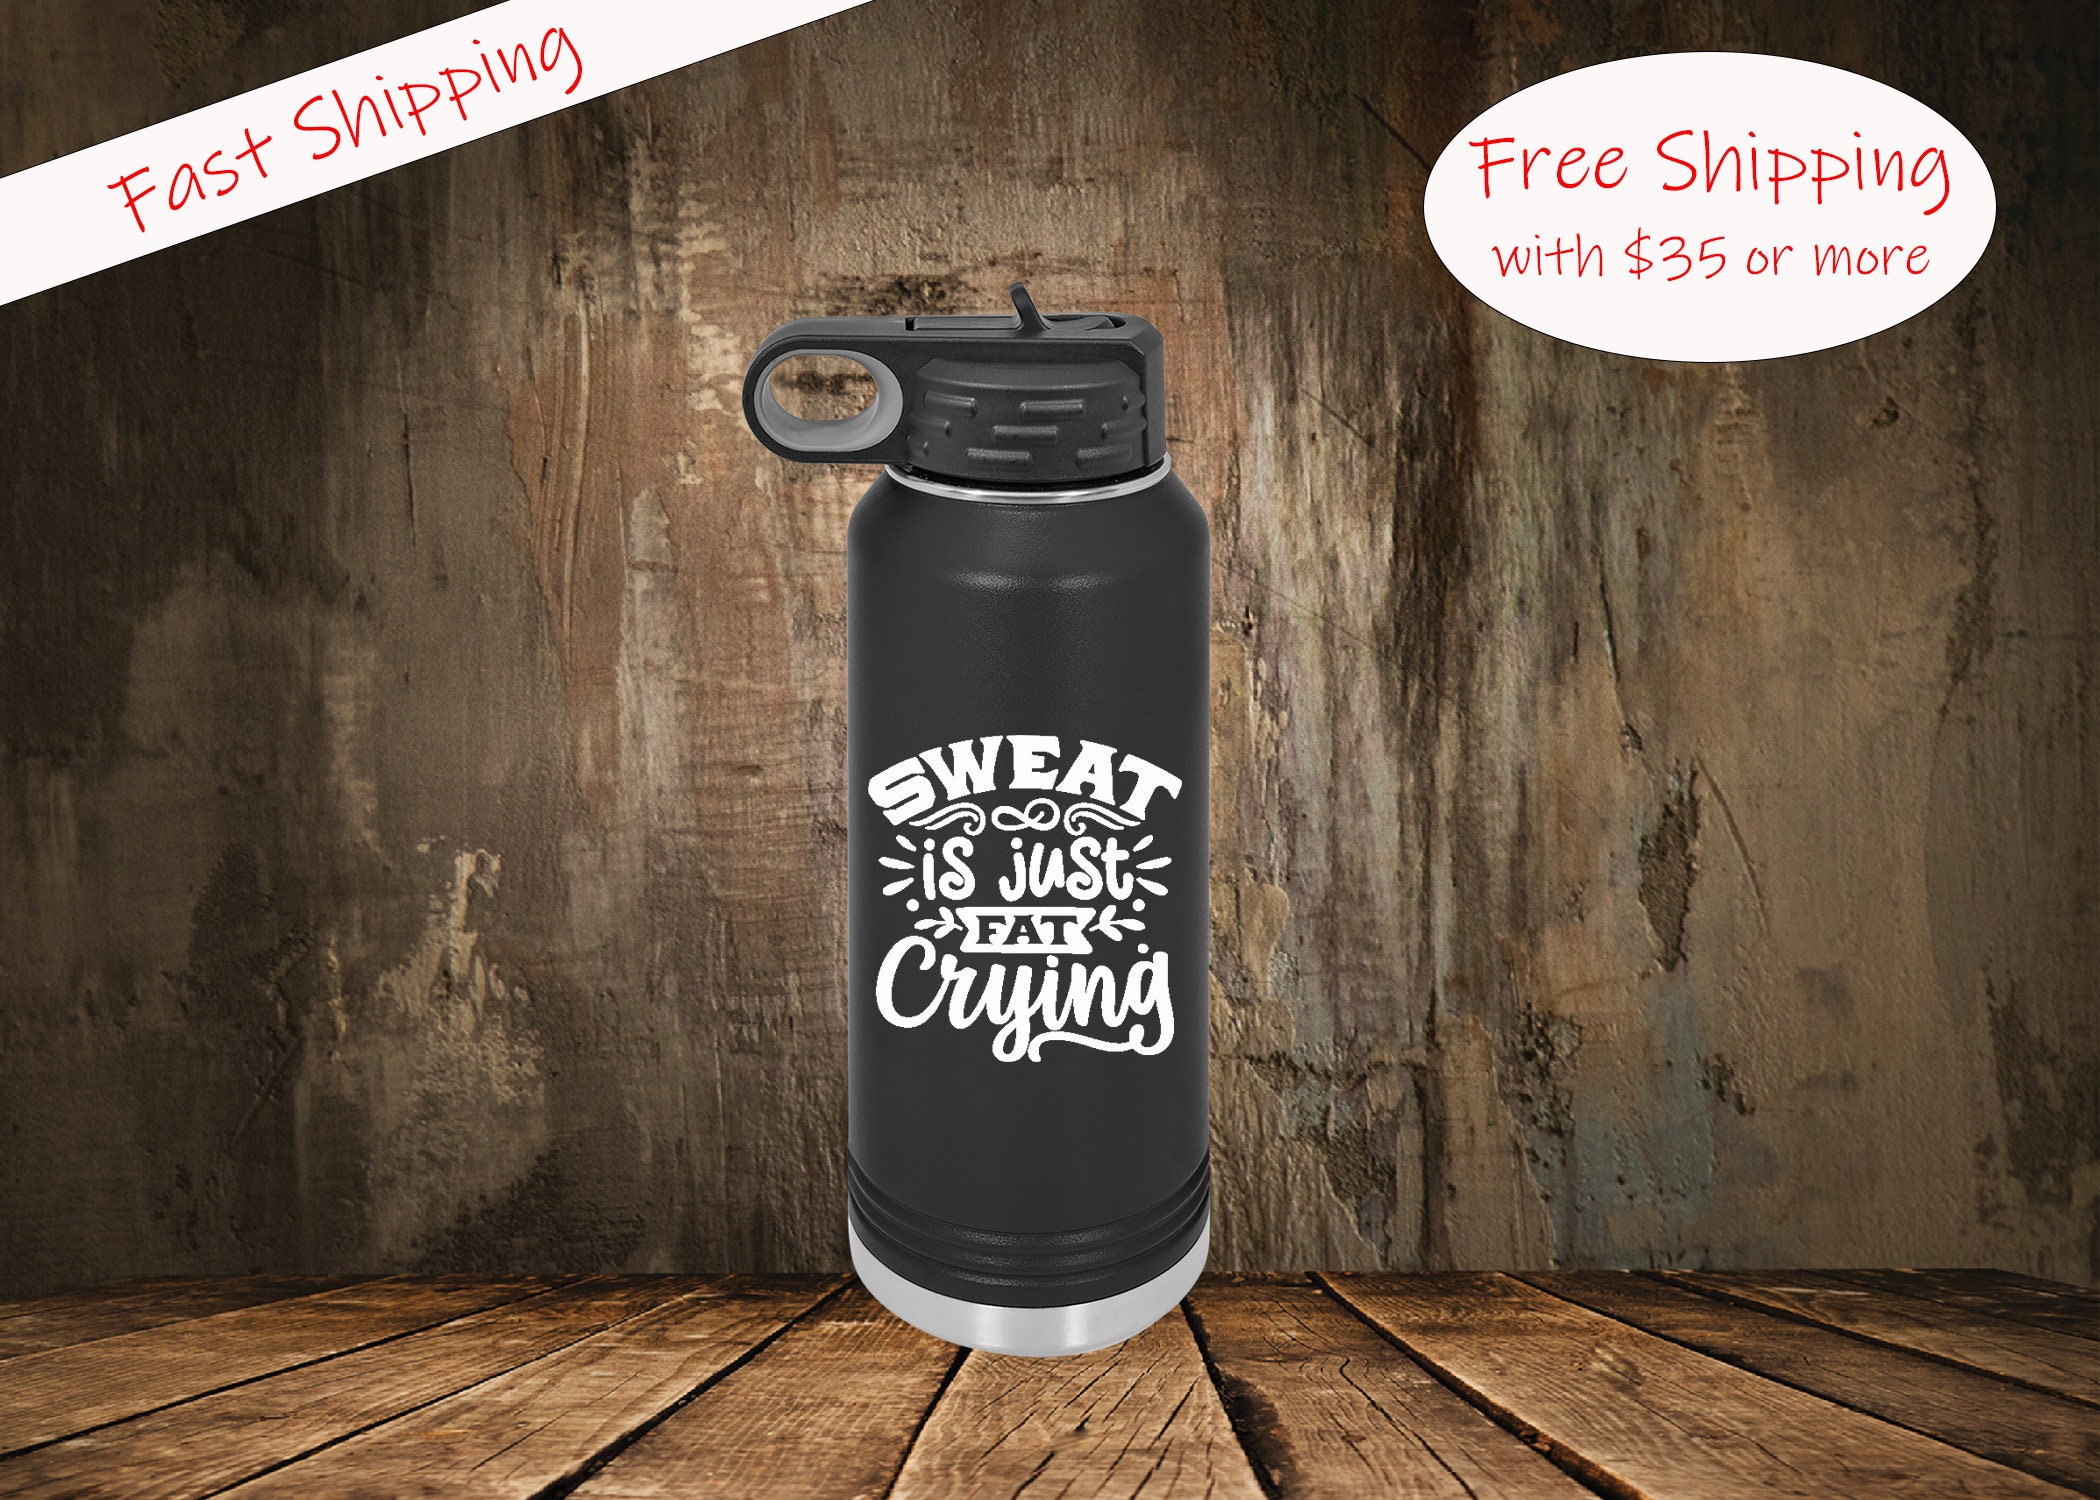 Sublimation Thermos Tumbler 16oz - Champion Crafter